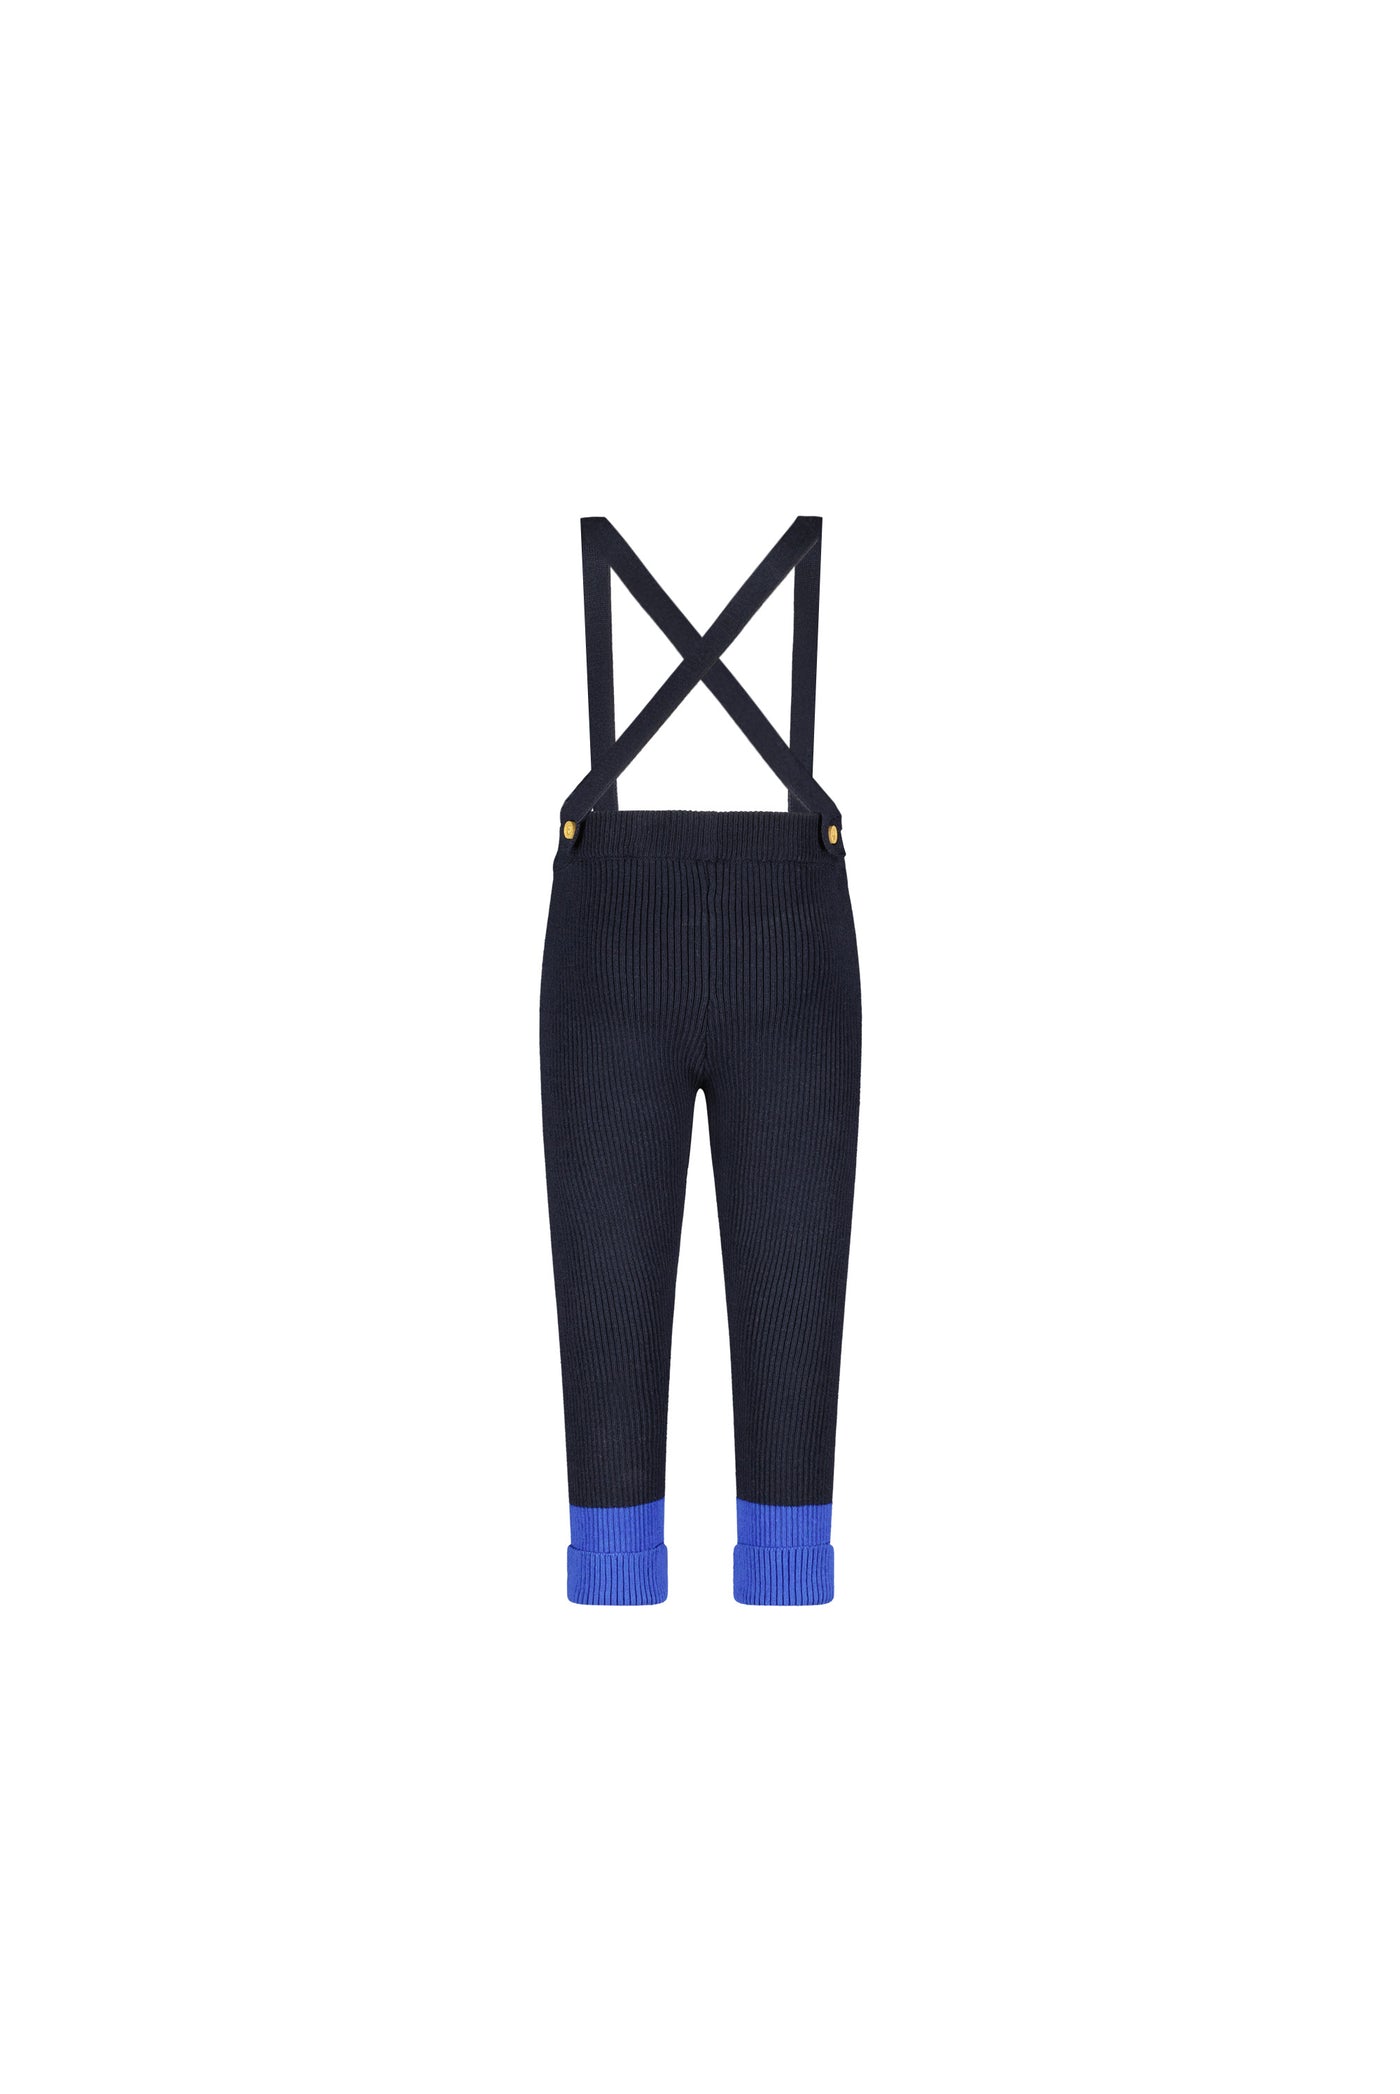 THE NEW CHAPTER - Knitted rib salopette rib legging with contrast folded hem - Blue Graphite